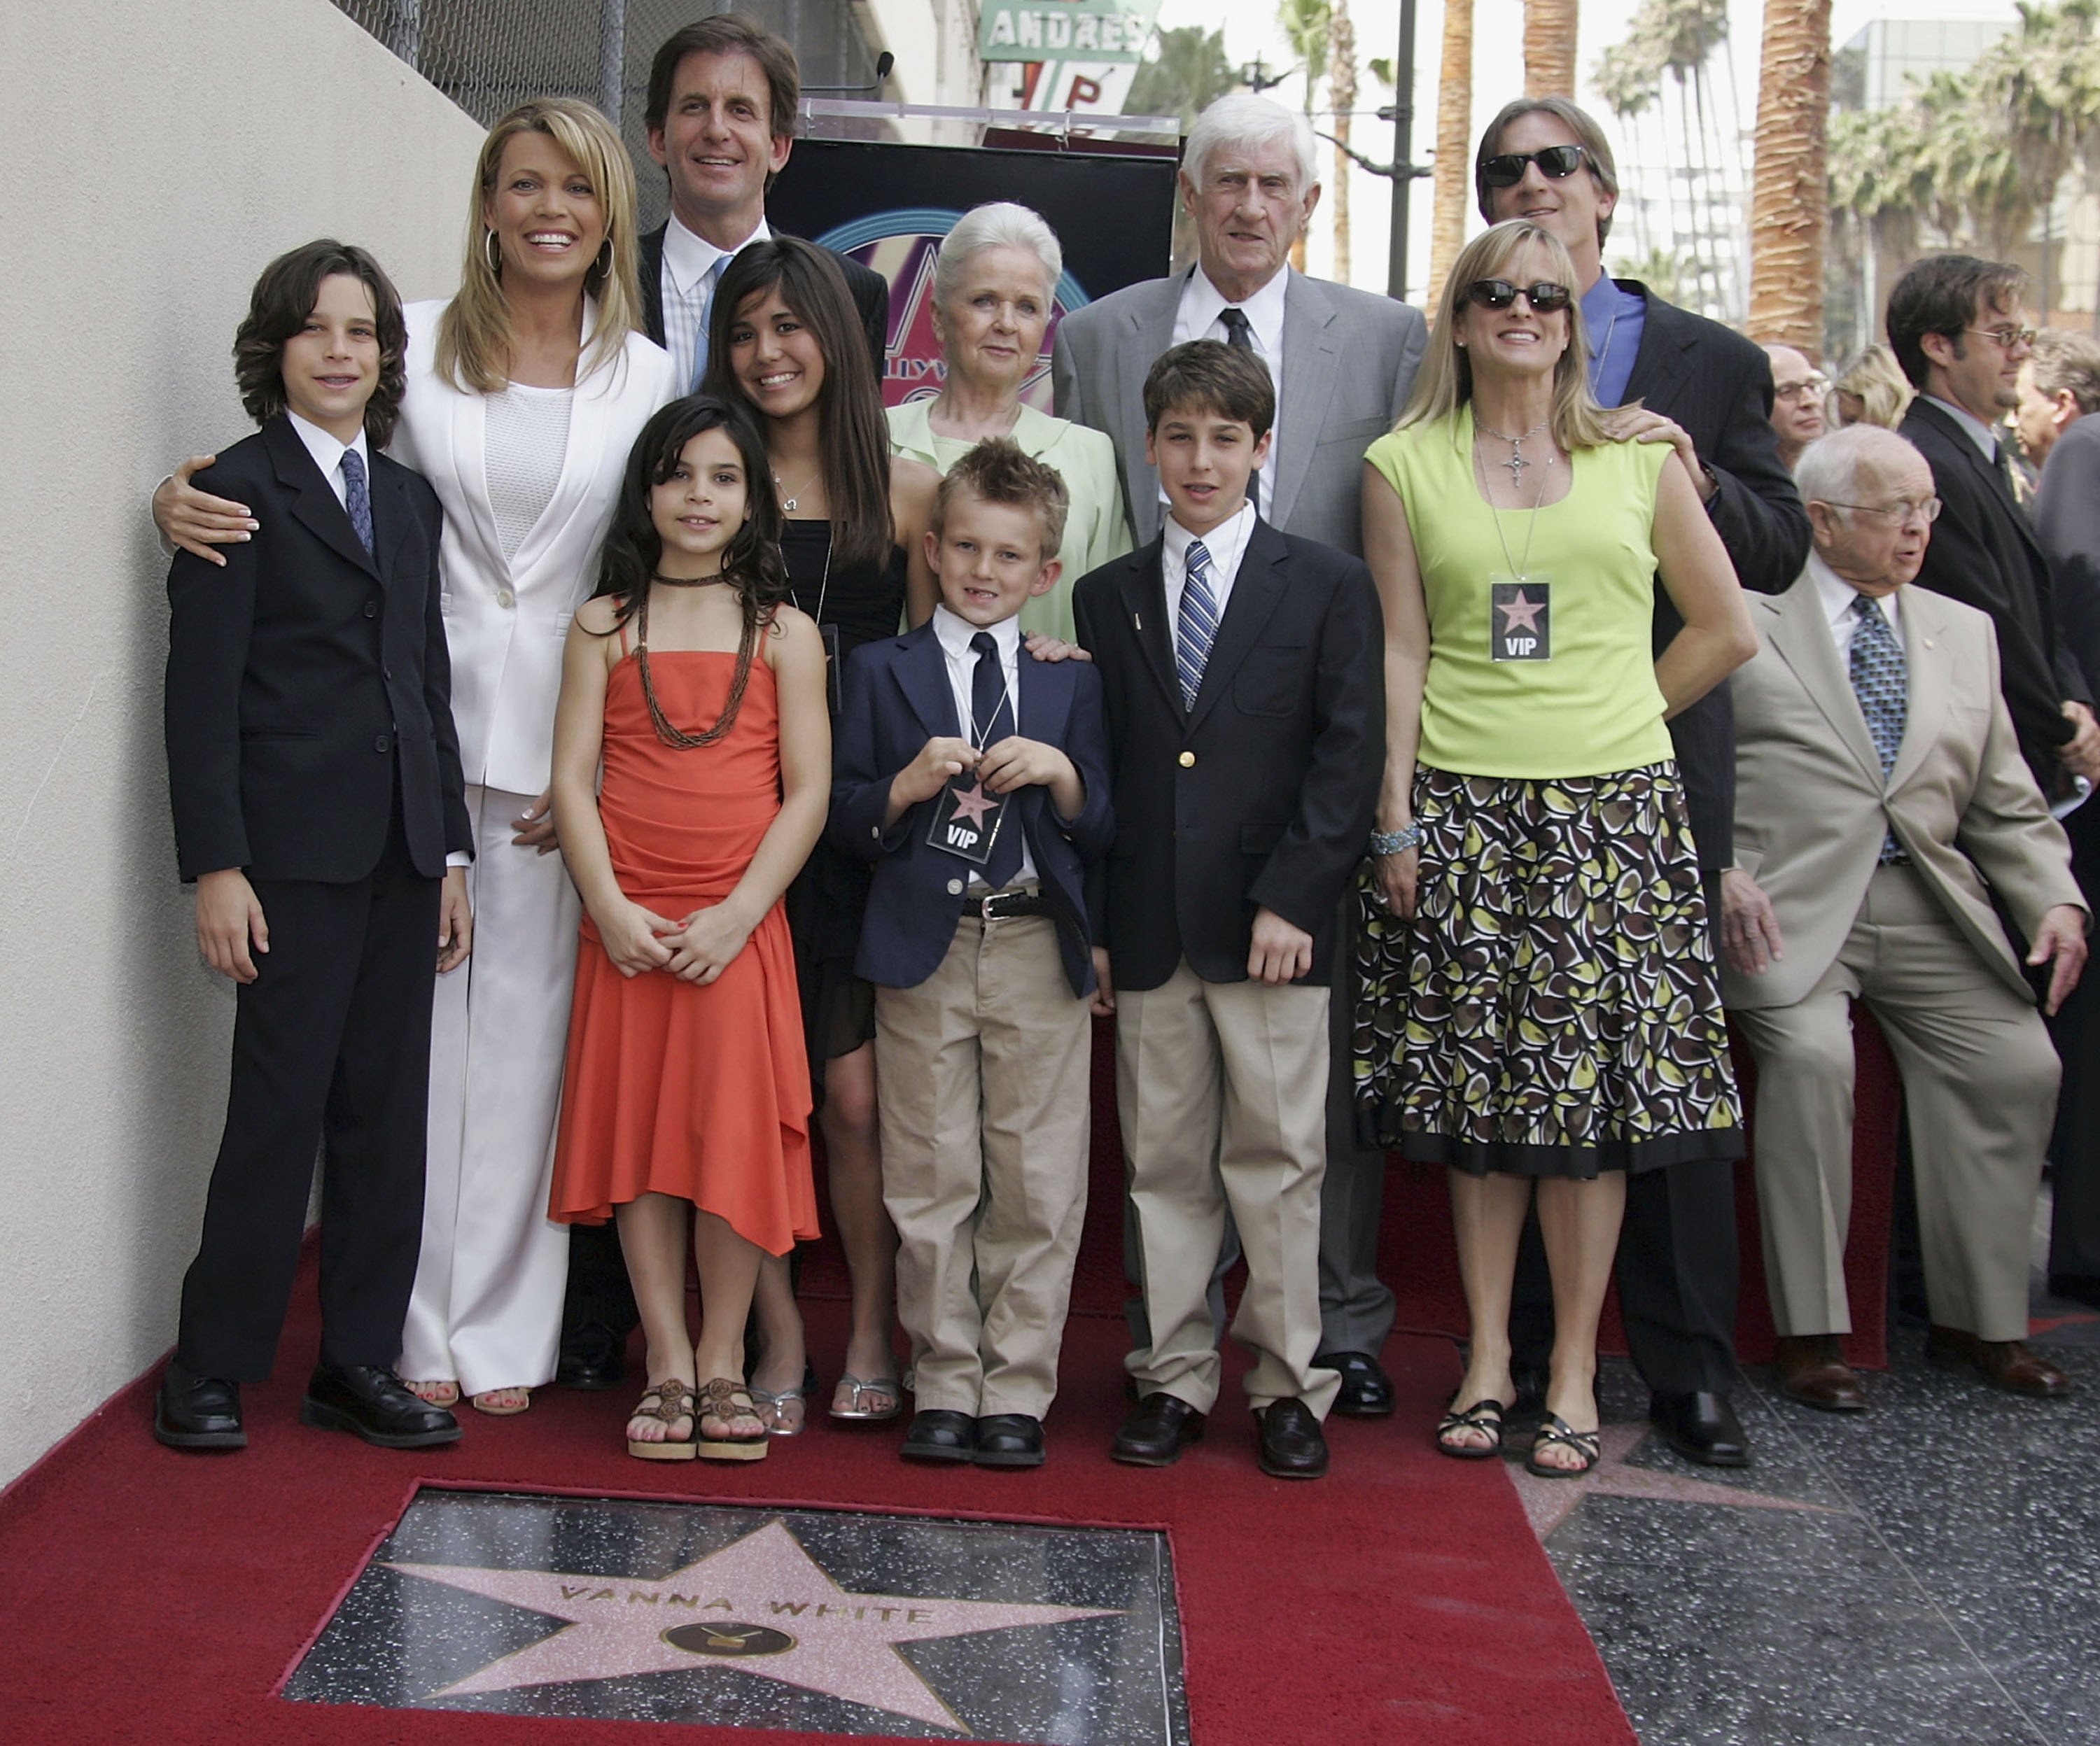 Wheel of Fortune Co-host Vanna White poses with family and friends after receiving A Star On The Walk Of Fame. | Source: Getty Images